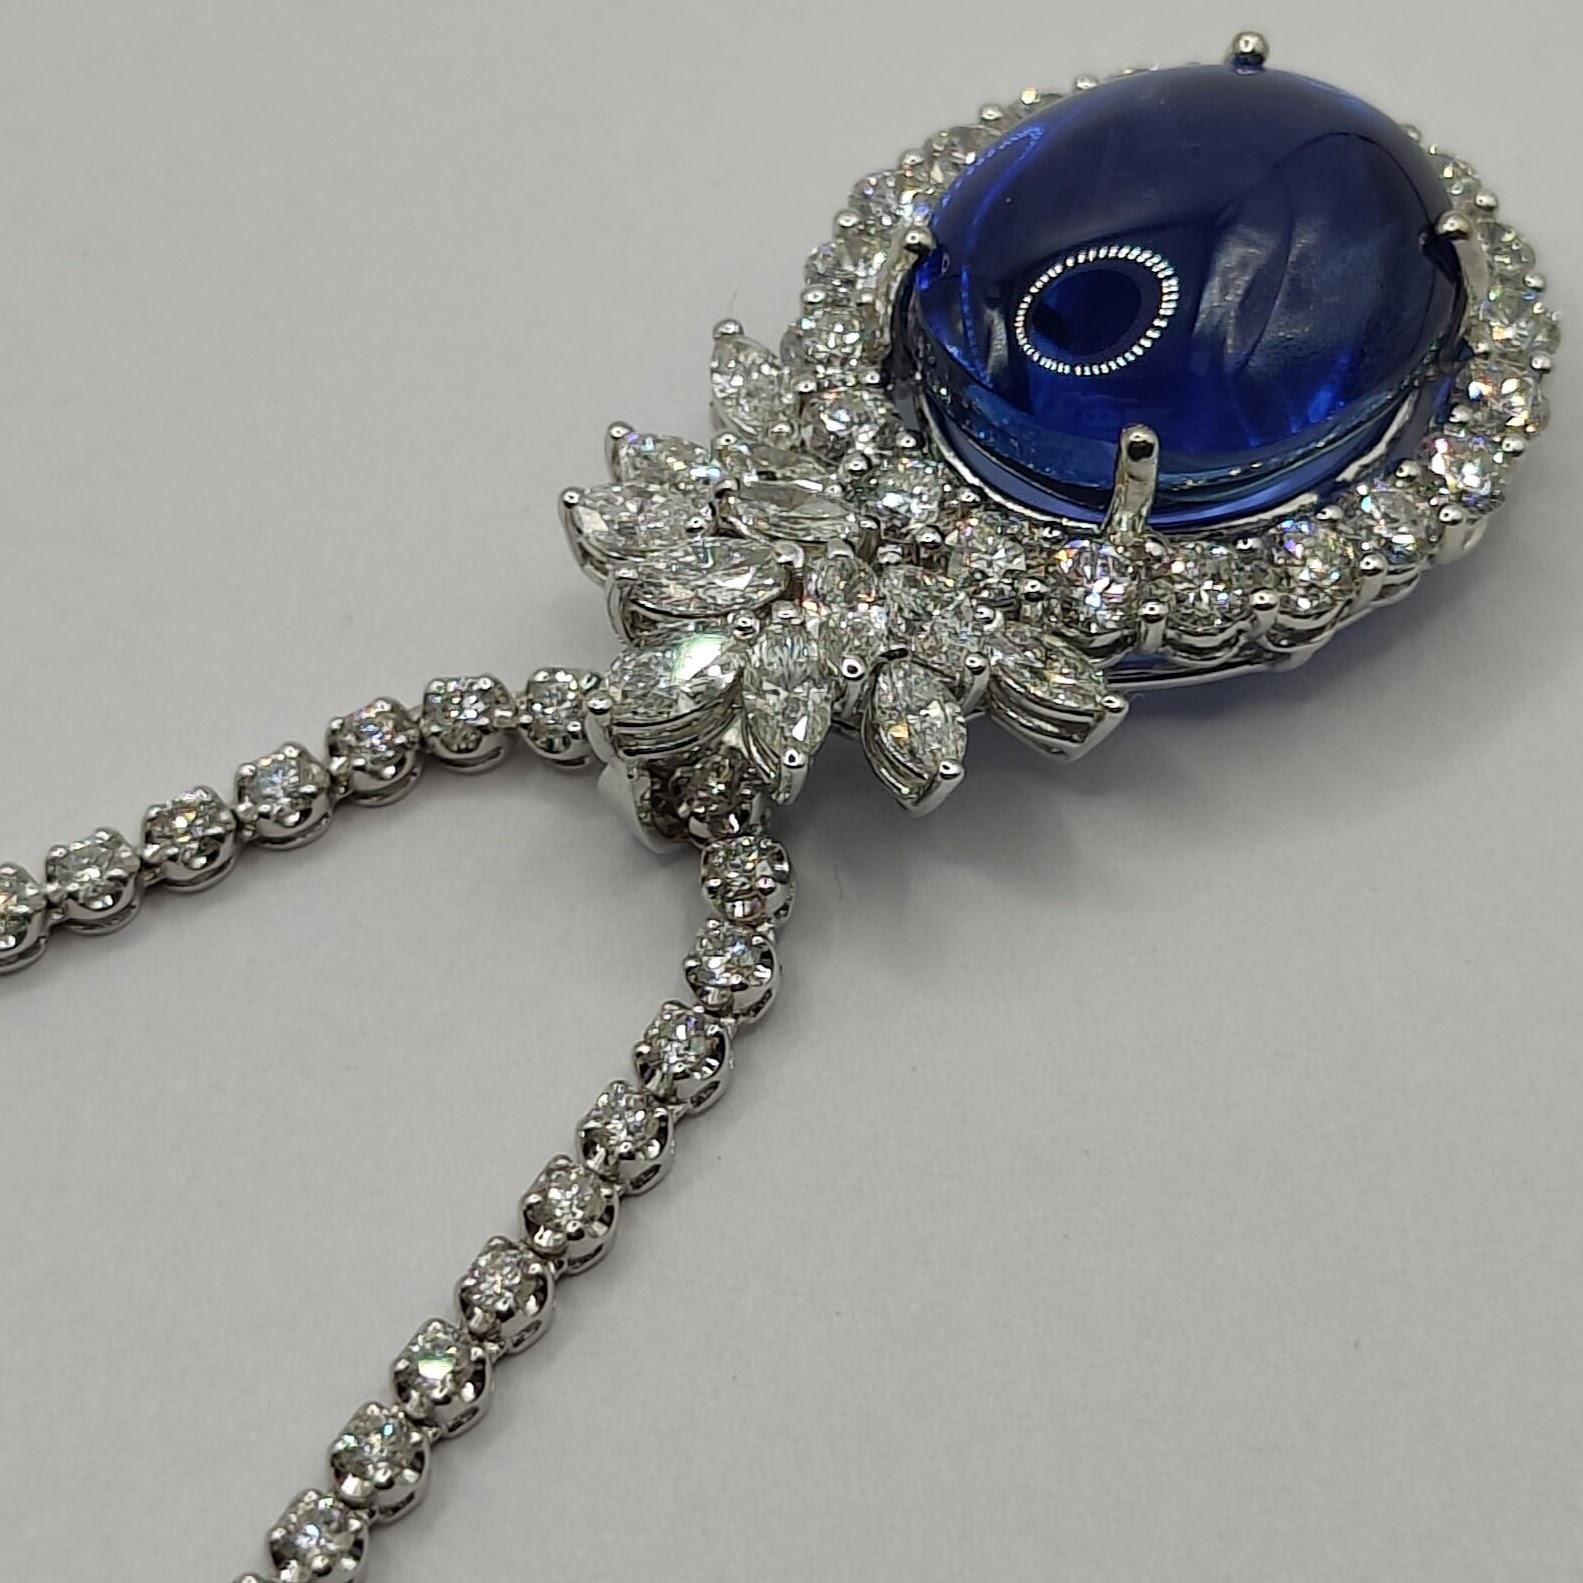 Gublin Certified 26.88ct Unheated Blue Star Sapphire & 7.41ct Diamond Necklace For Sale 3